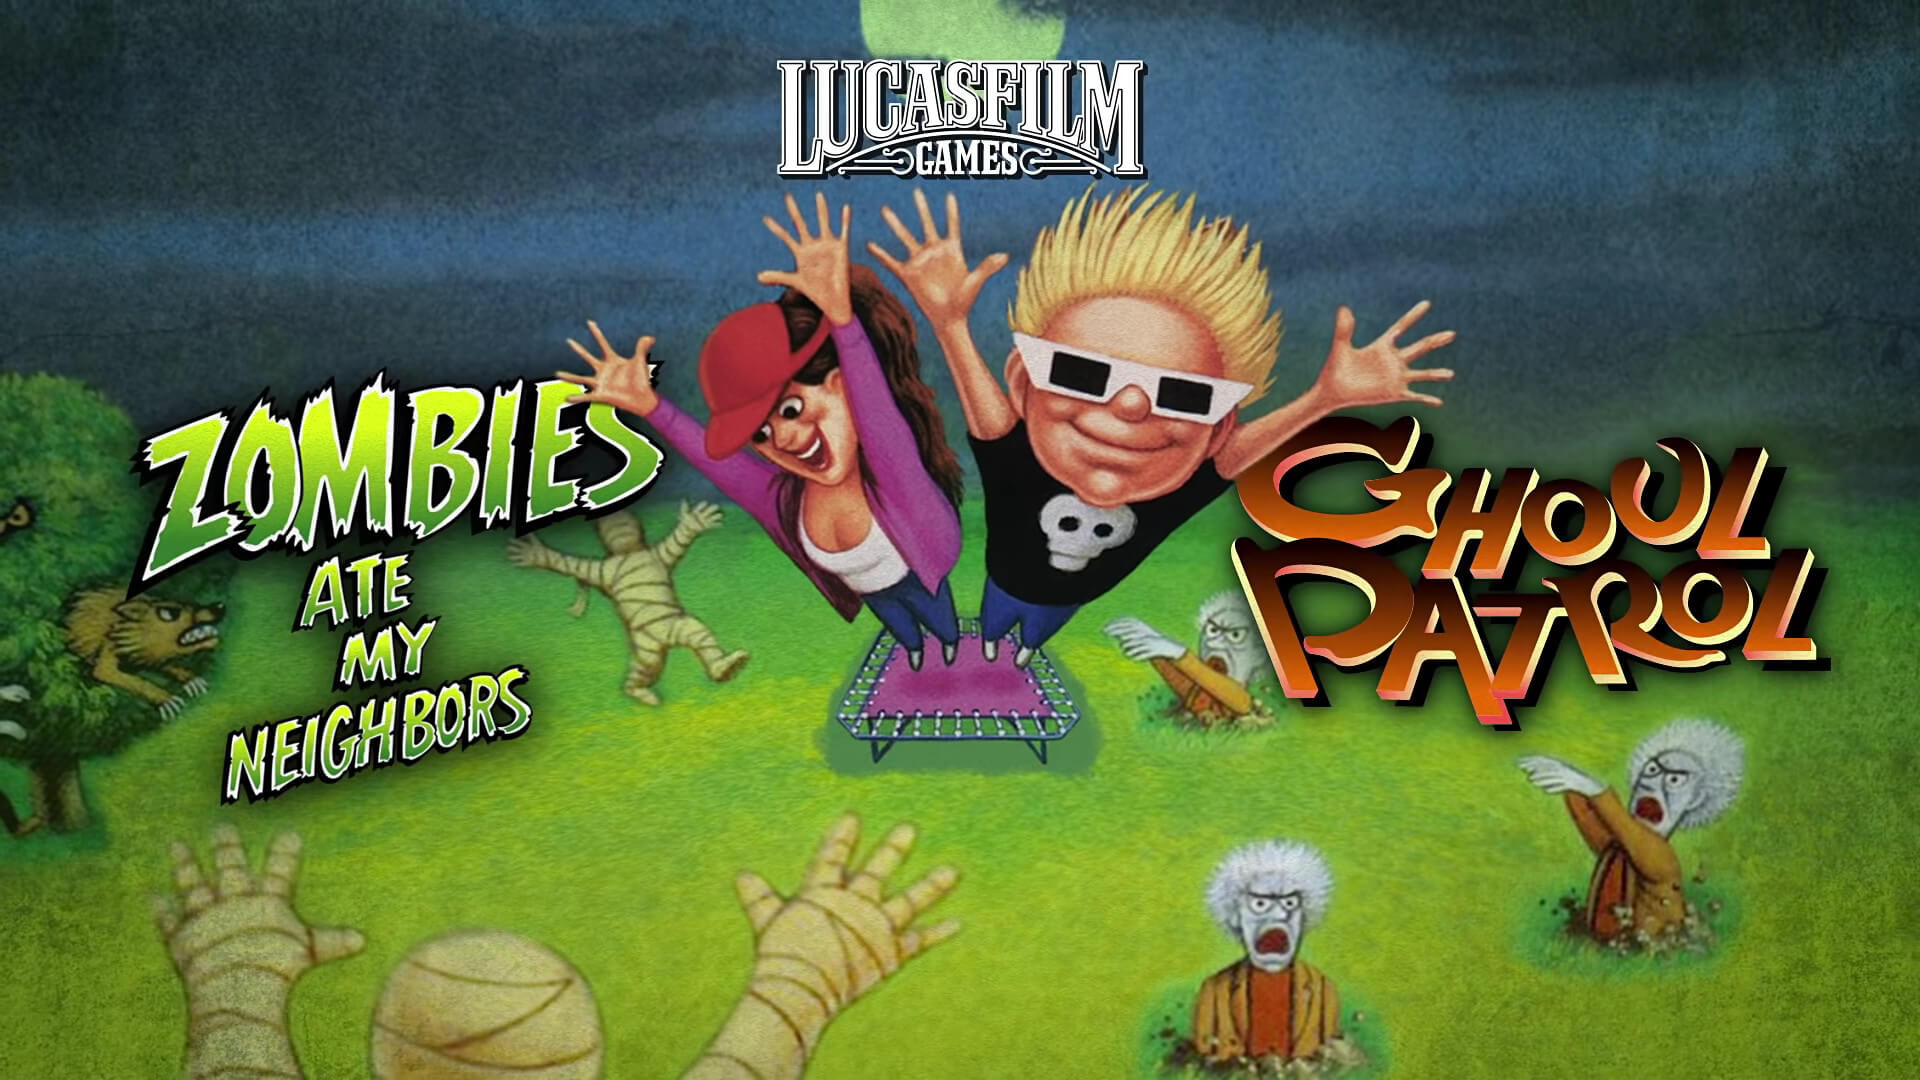 Lucasfilm Classic Games: Zombies Ate My Neighbours and Ghoul Patrol